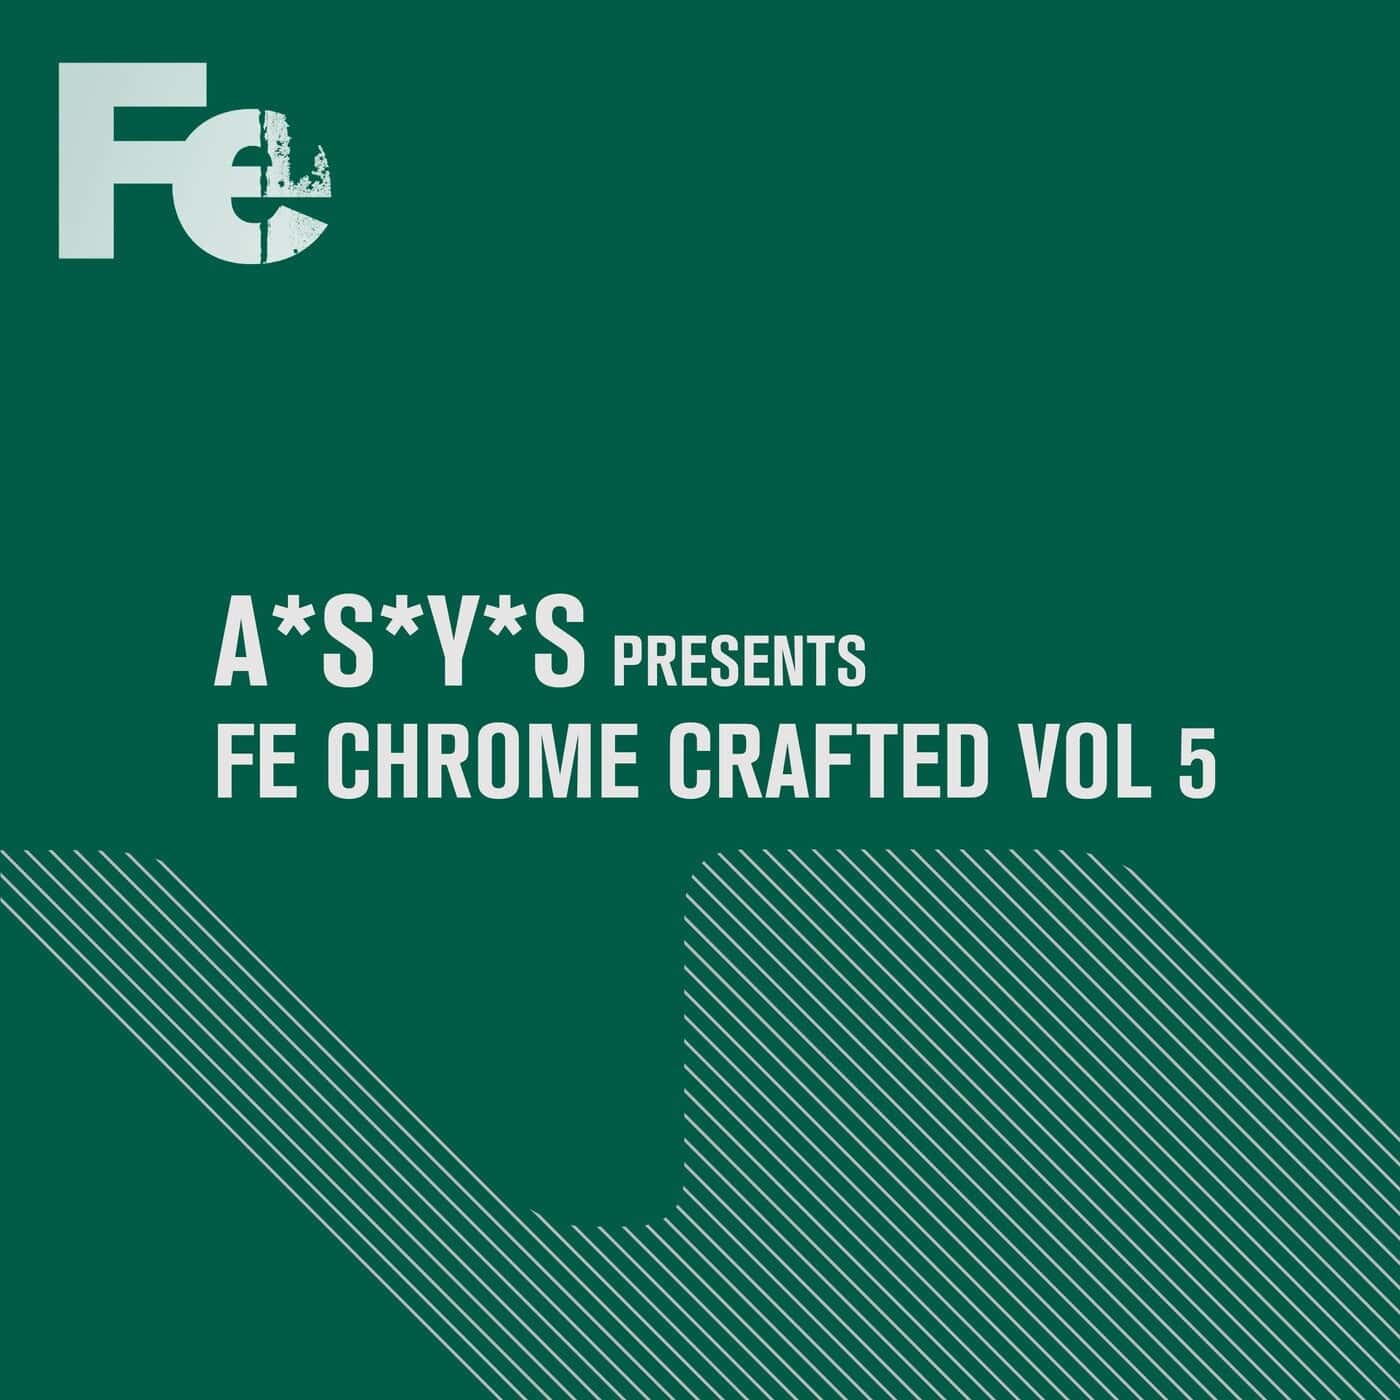 Download Fe Chrome Crafted, Vol. 5 on Electrobuzz